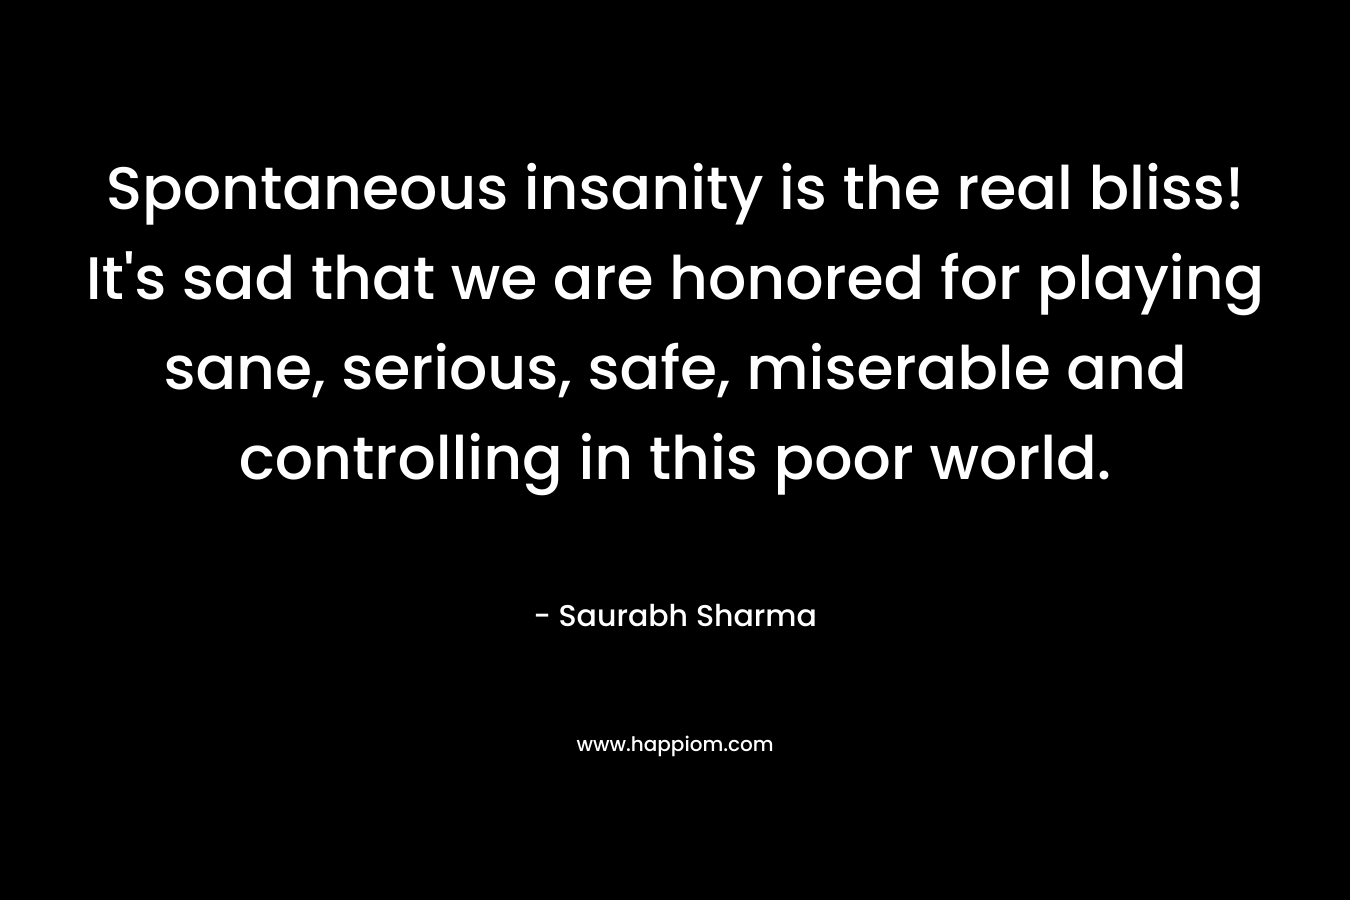 Spontaneous insanity is the real bliss! It's sad that we are honored for playing sane, serious, safe, miserable and controlling in this poor world.